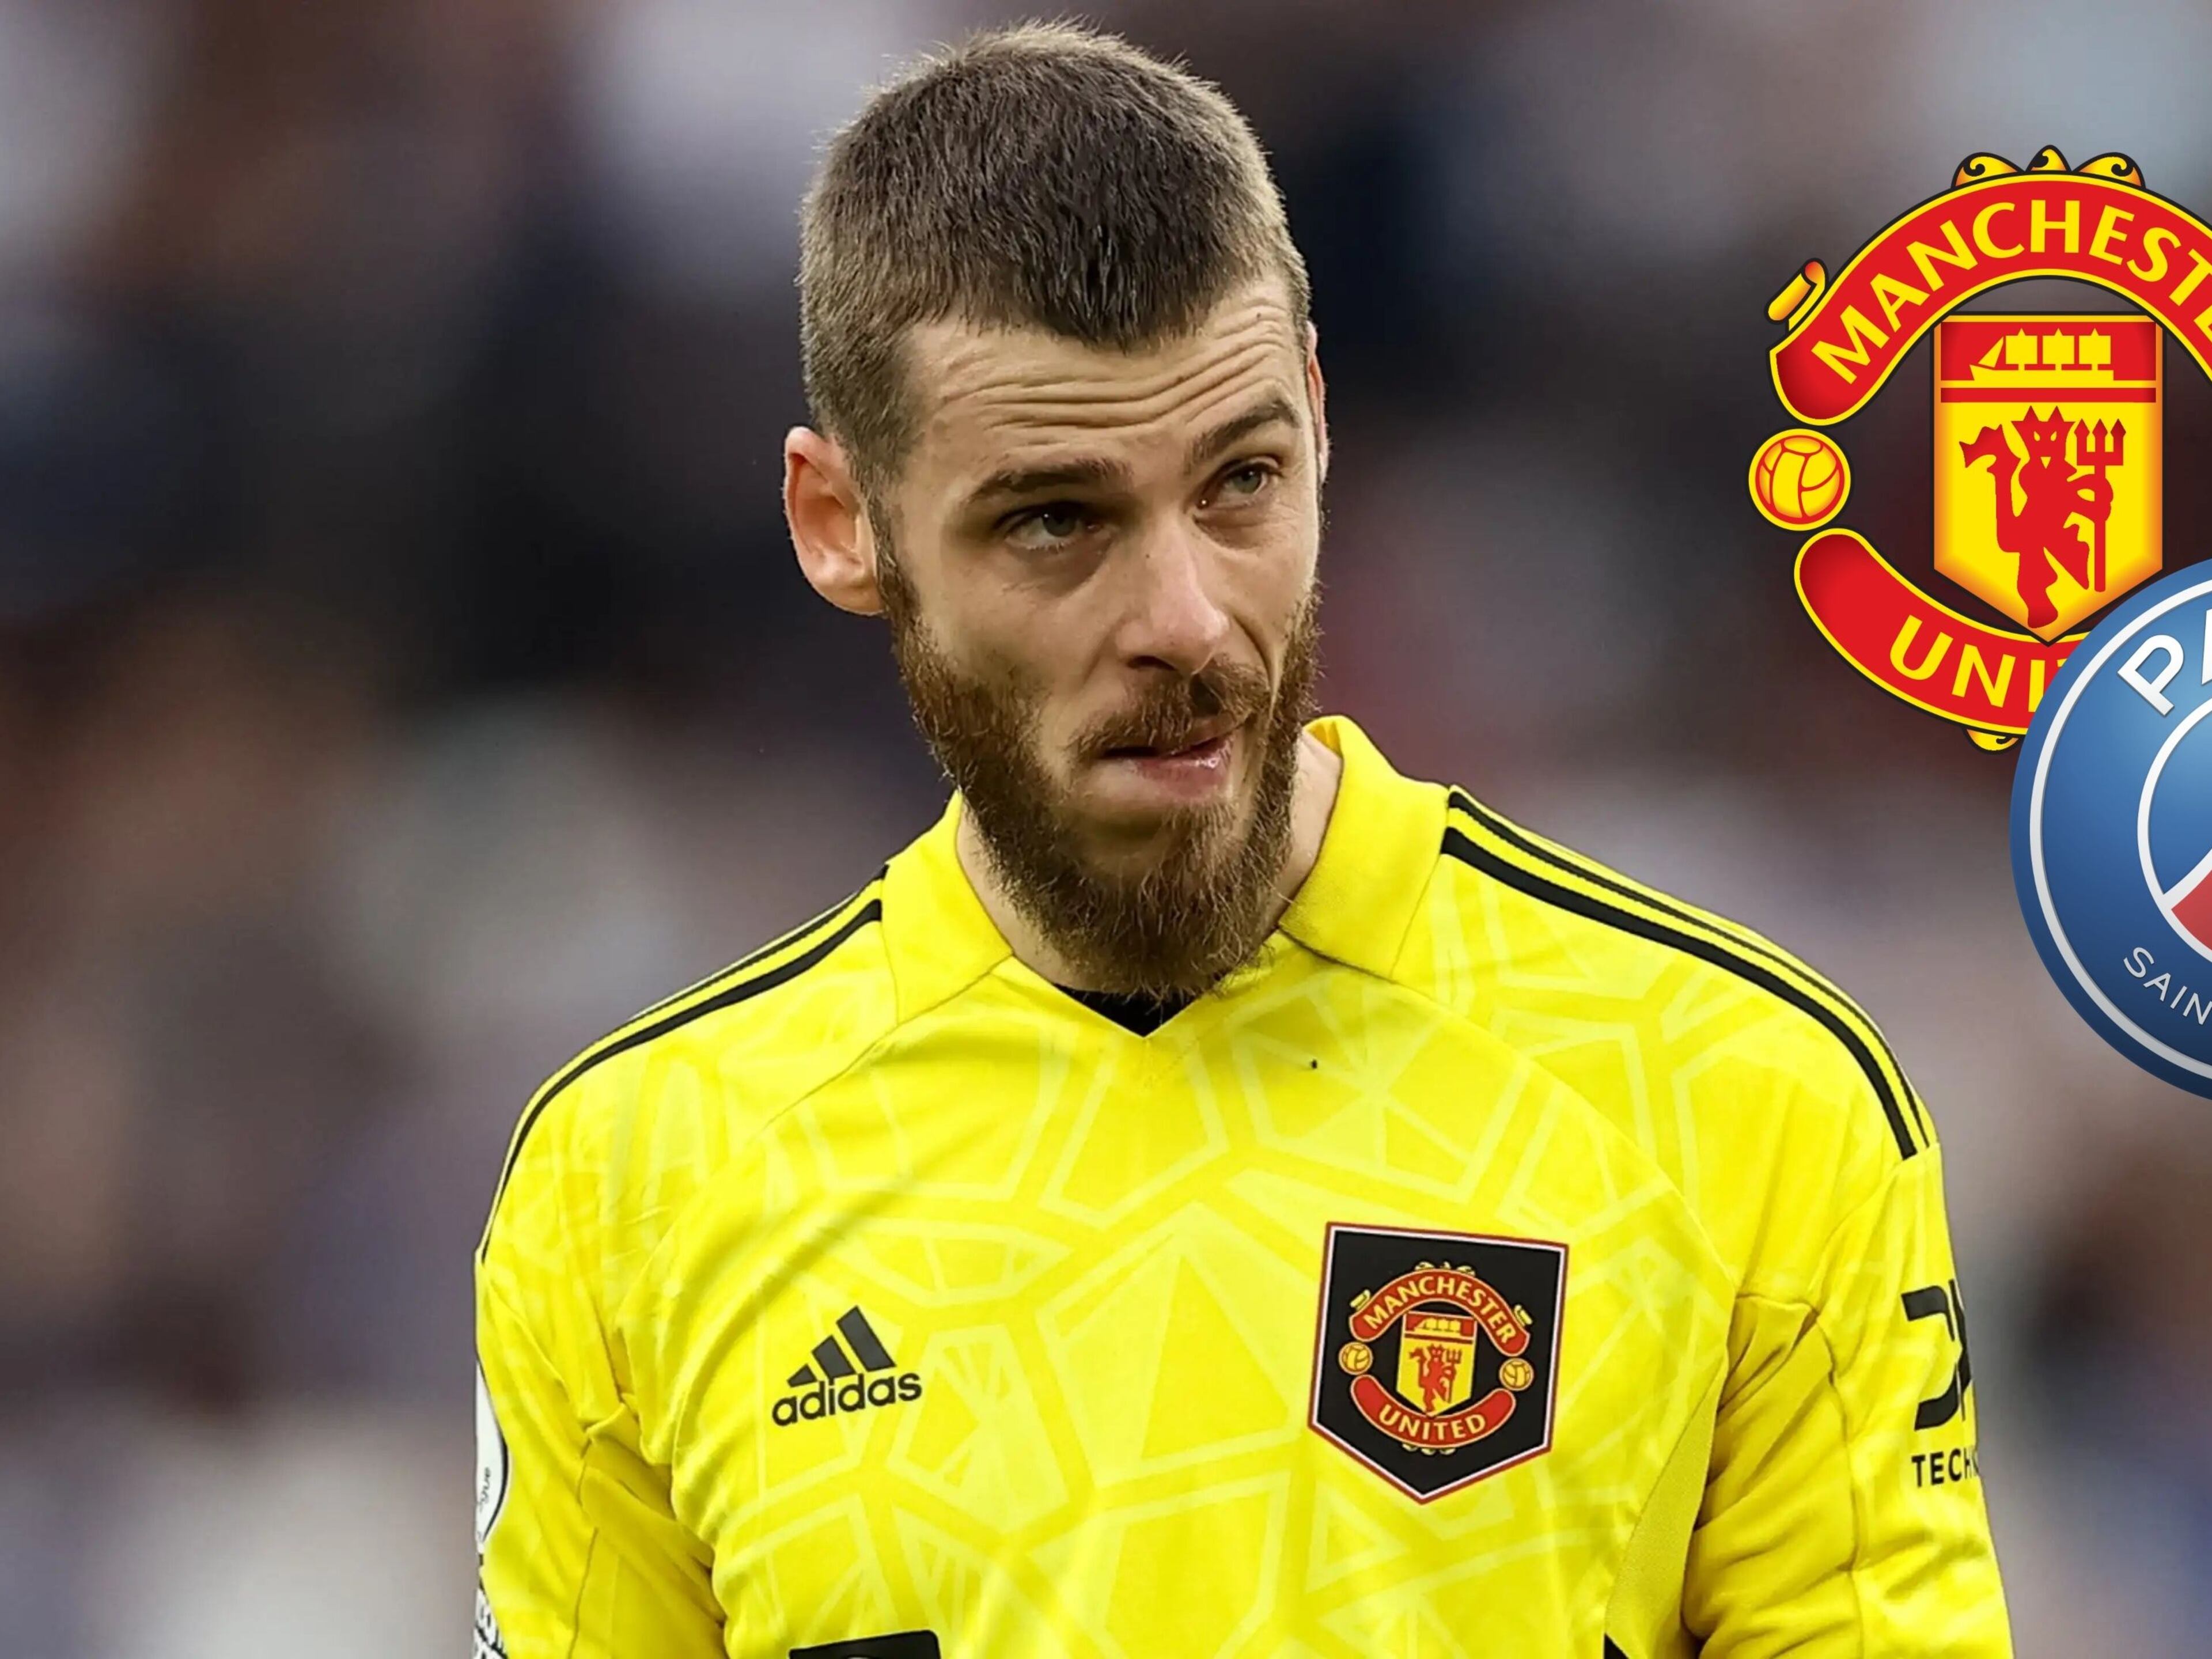 PSG offered 21 million to De Gea, but this club that embittered United wants to buy him